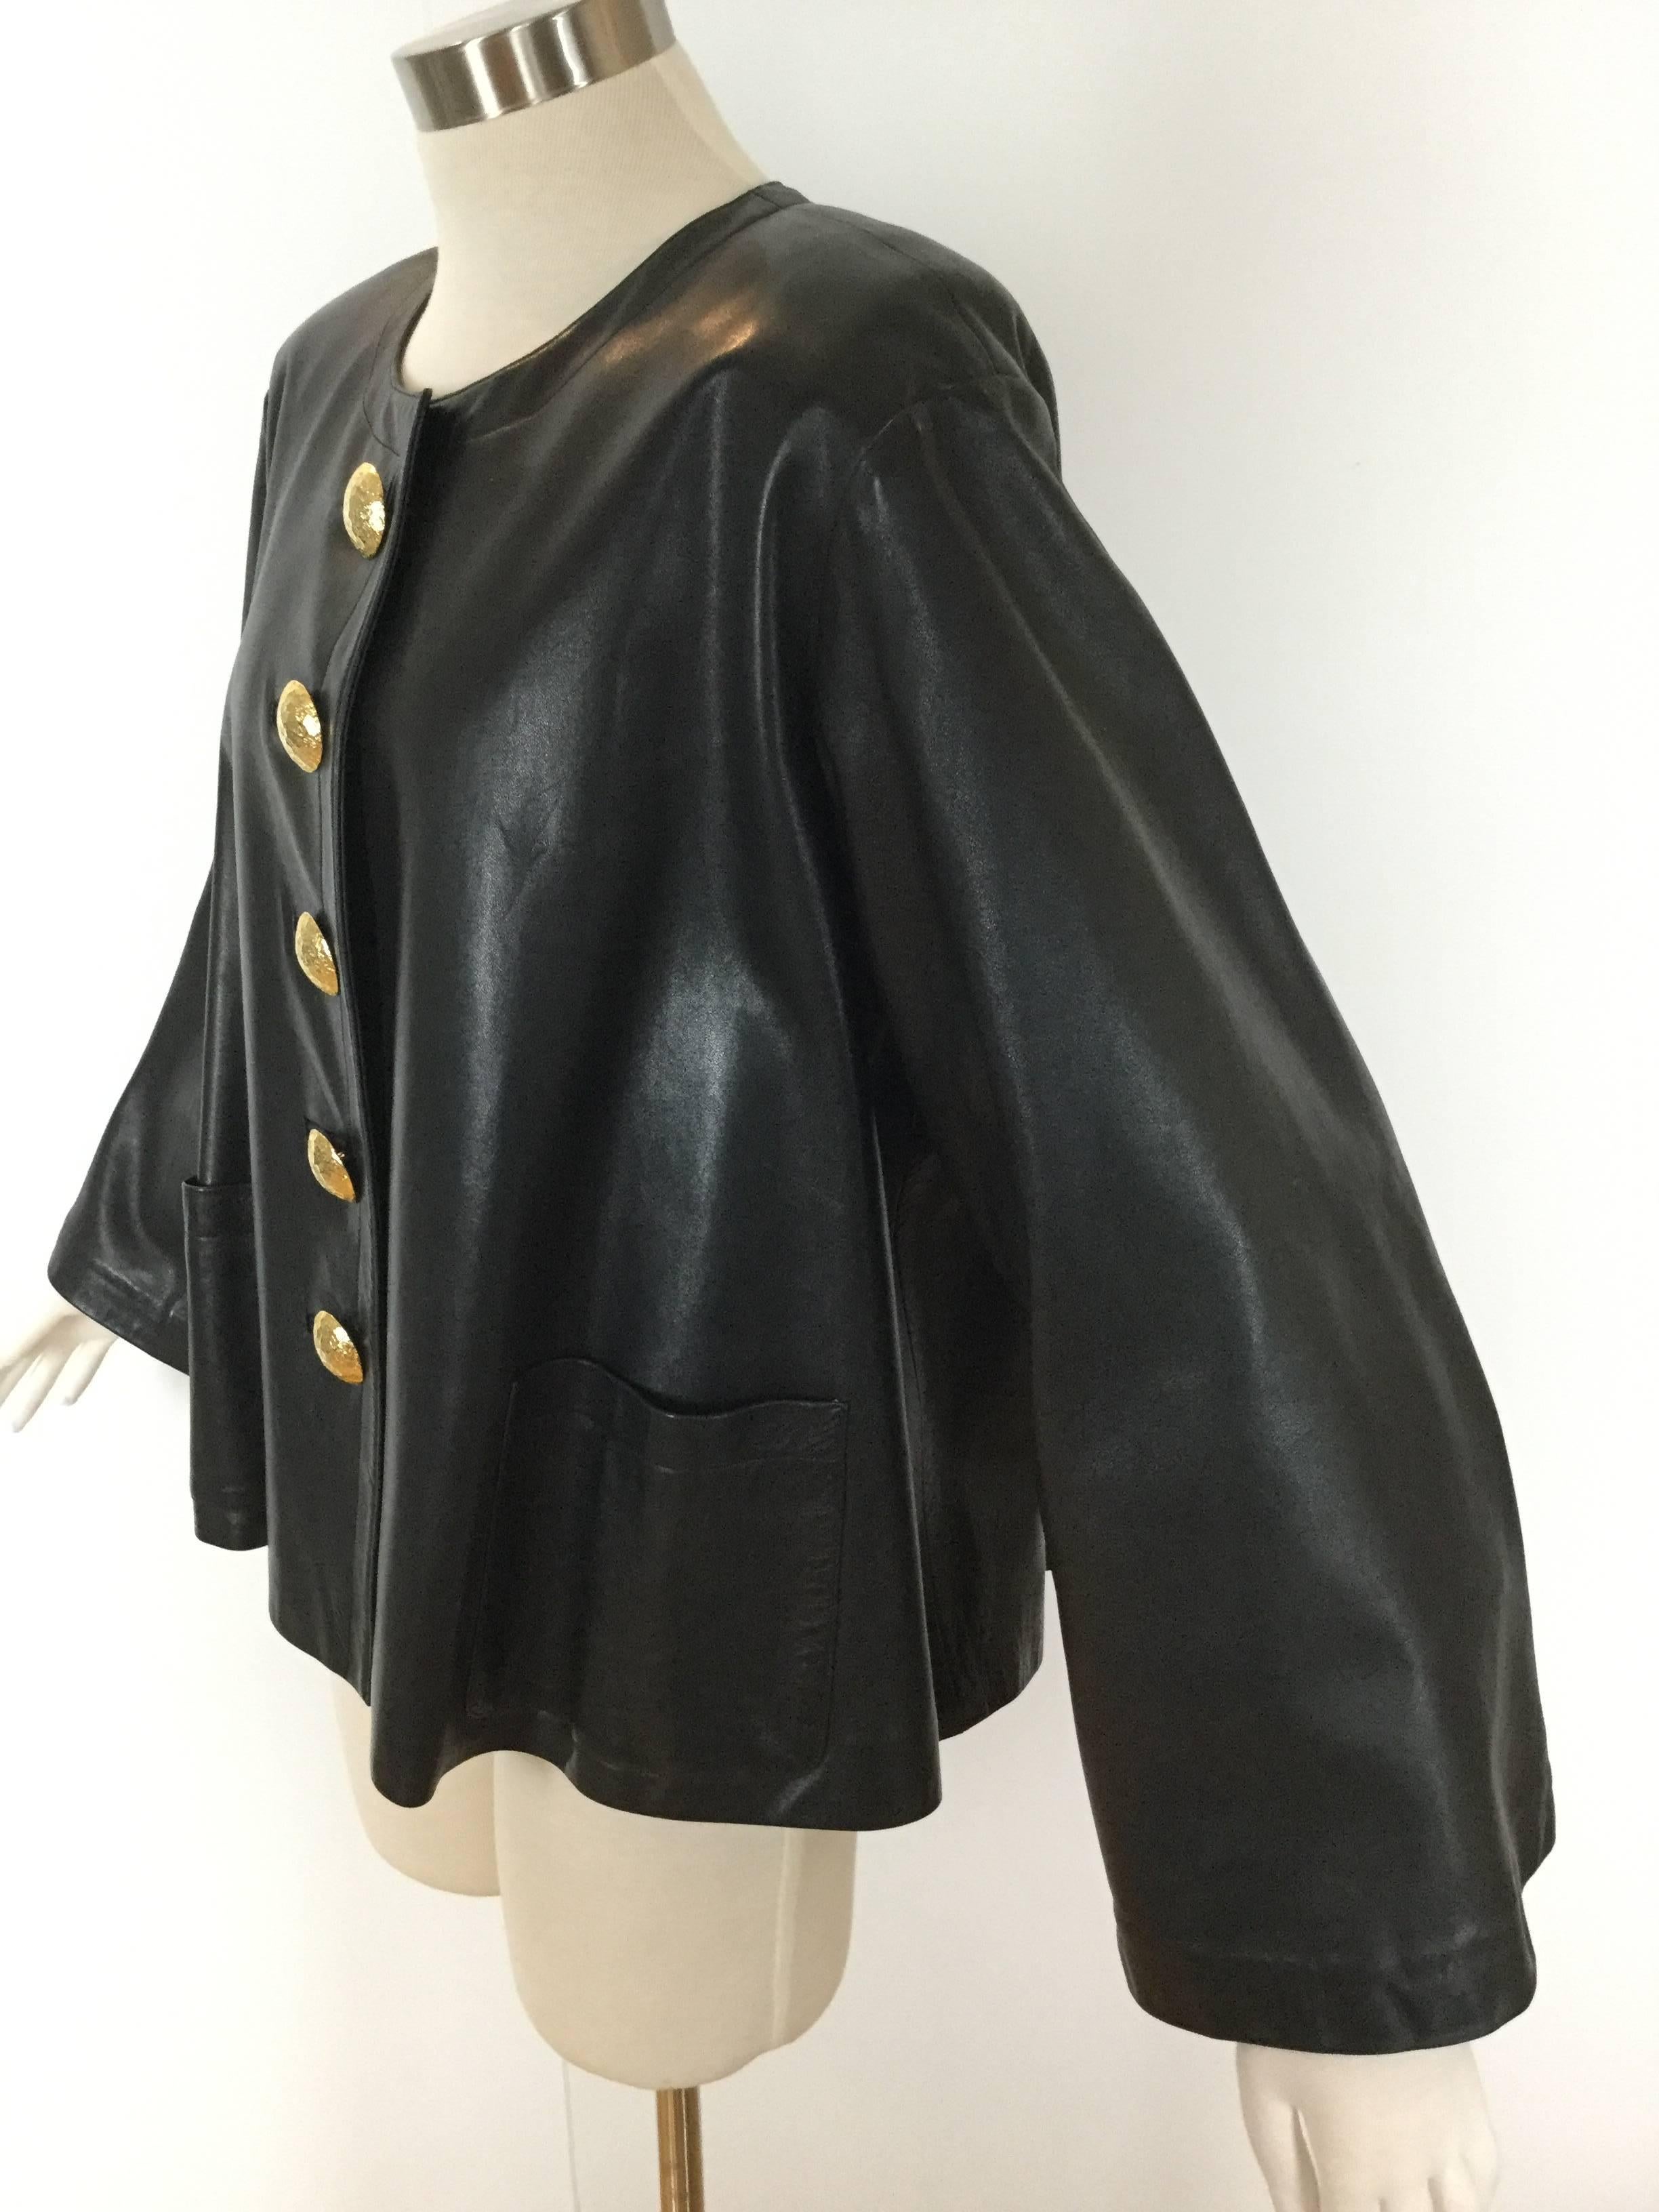 
Wonderful Yves Saint Laurent Rive Gauche jacket in butter soft black leather.

This flaring swing style cut is incredibly flattering to wear.

Amazing bell sleeves are 8.5 inches wide at the bottom.

Huge, gorgeous gilt metal buttons